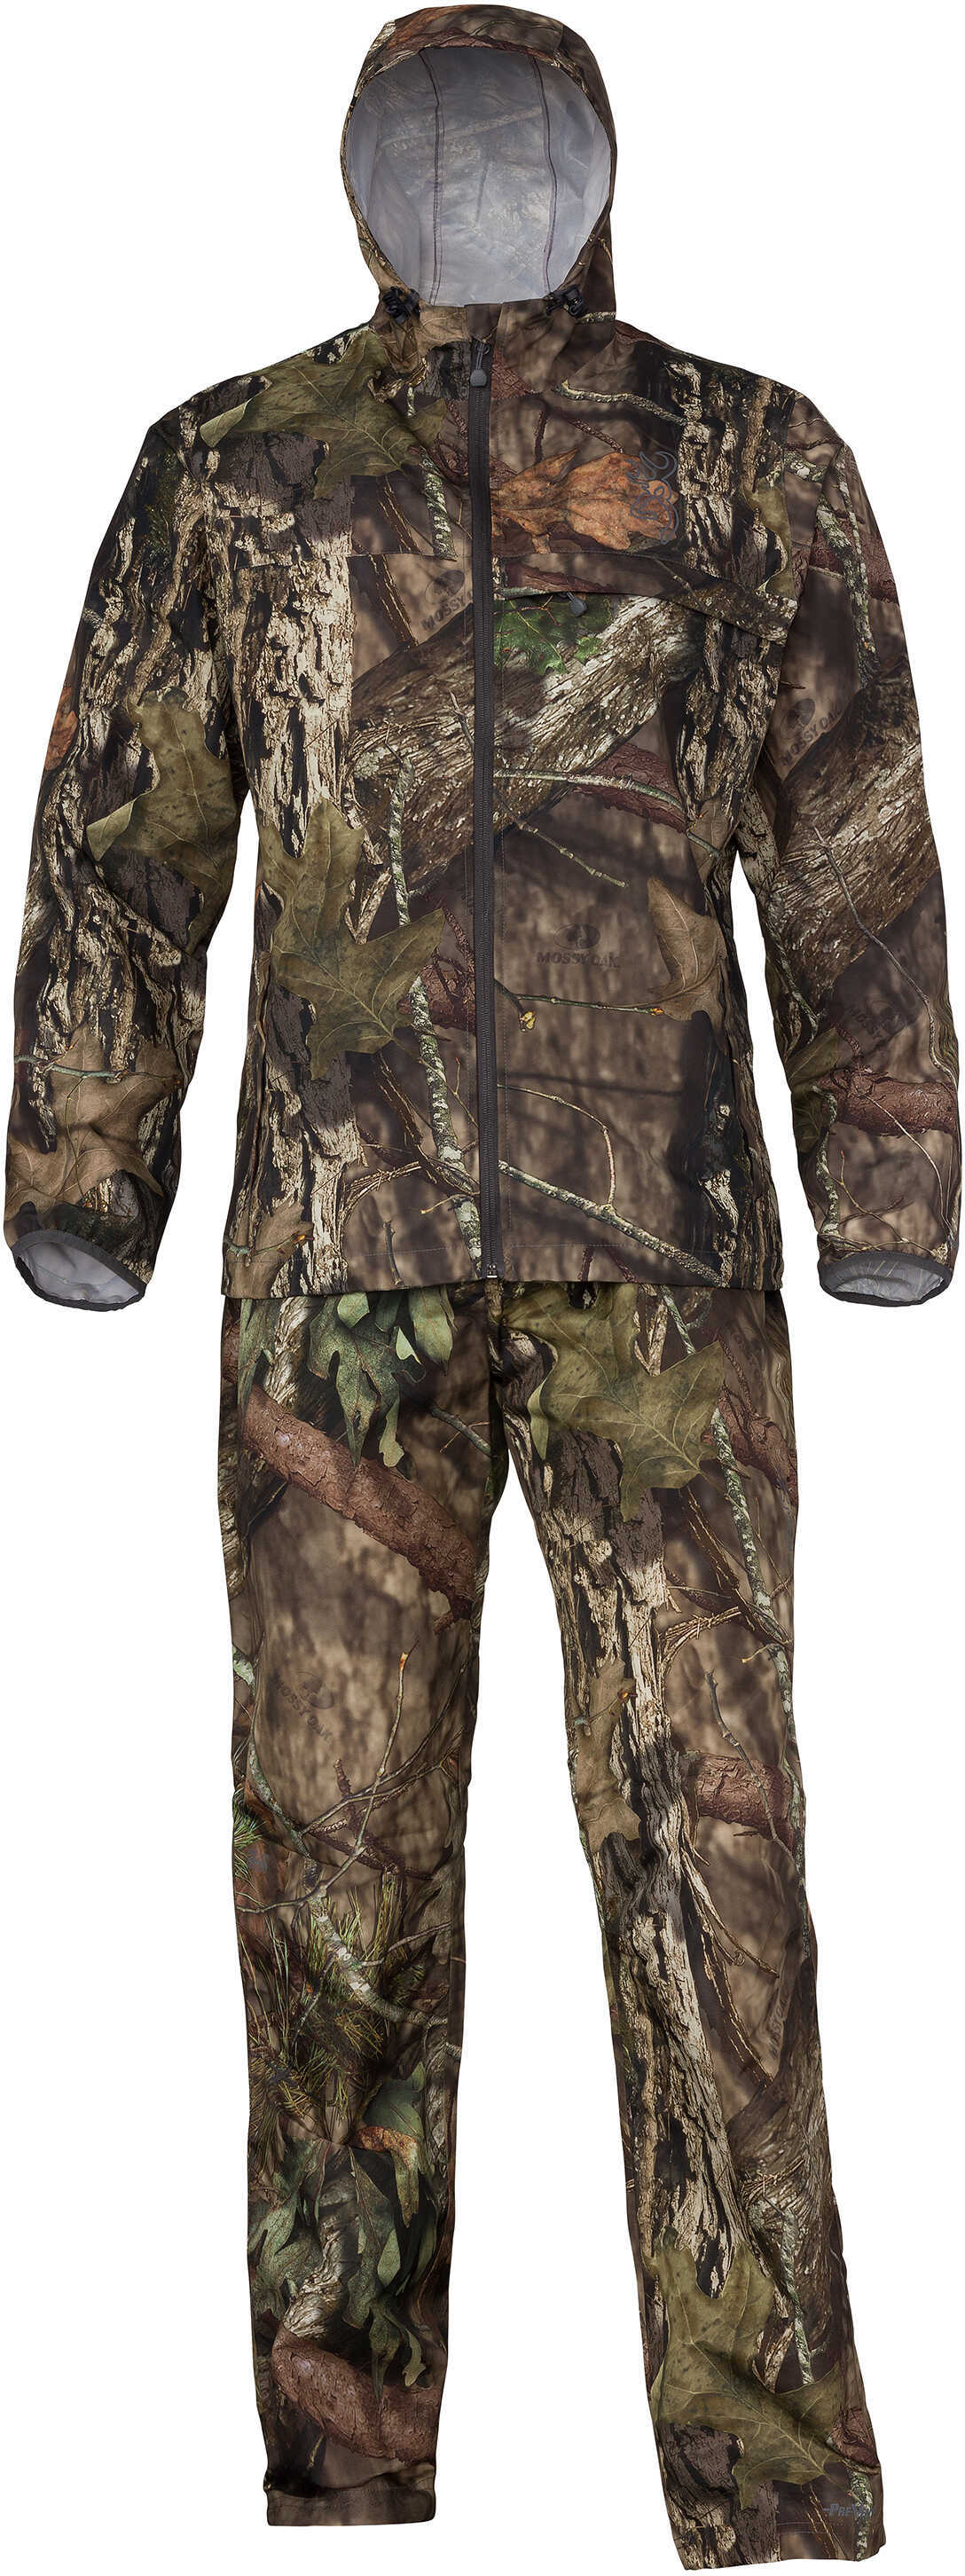 Browning Hell's Canyon CFS-WD Rain Suit Size Large (Mossy Oak Break-up Country)